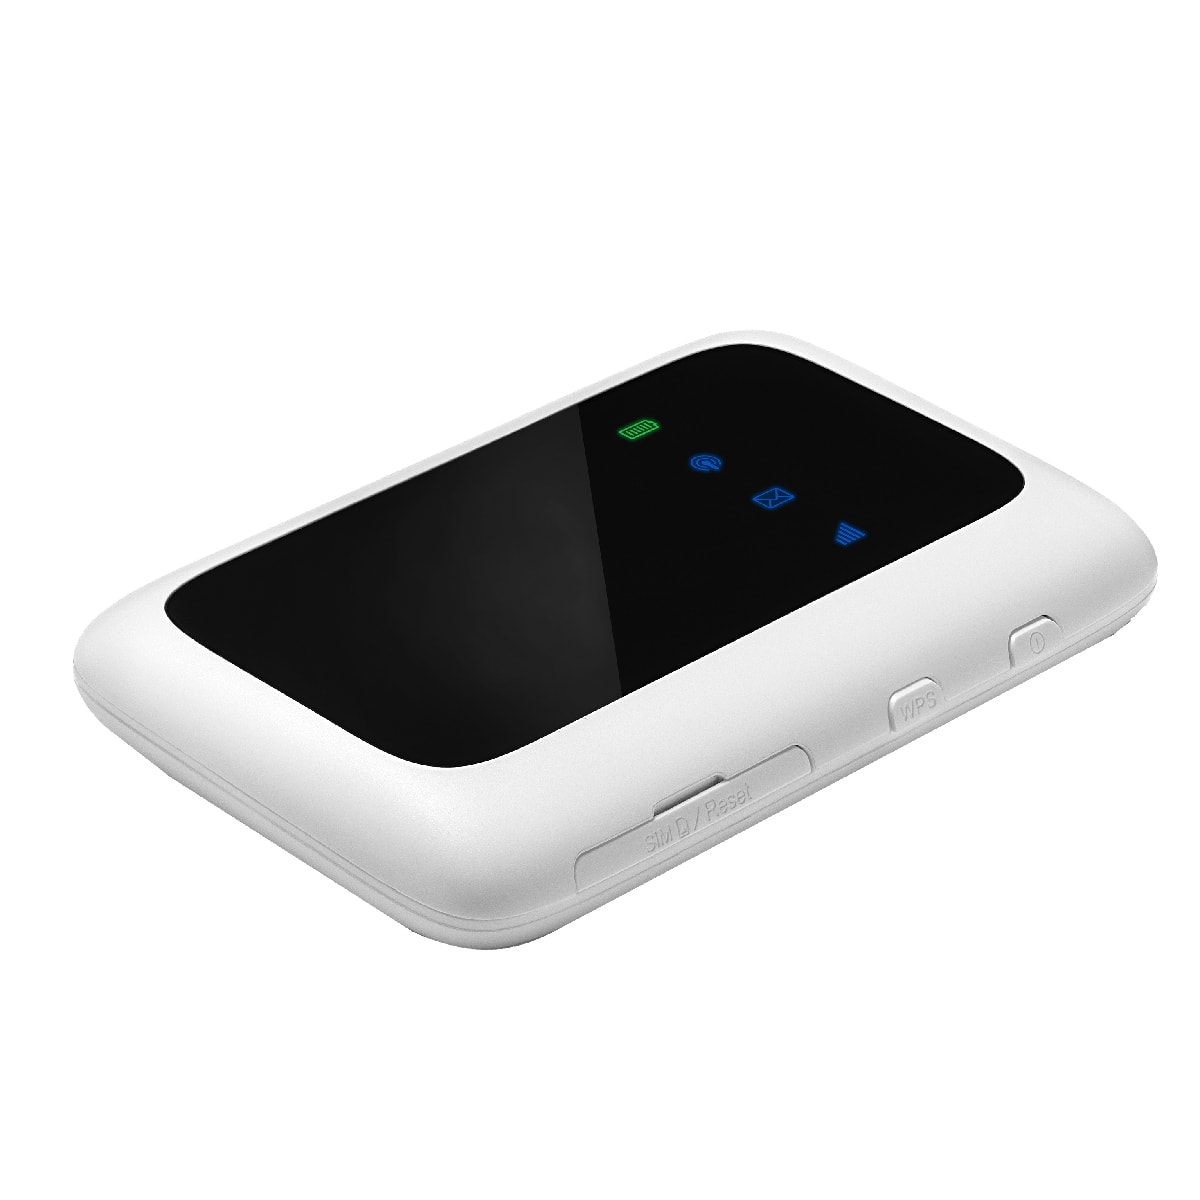  WIFI Access Point (4G)